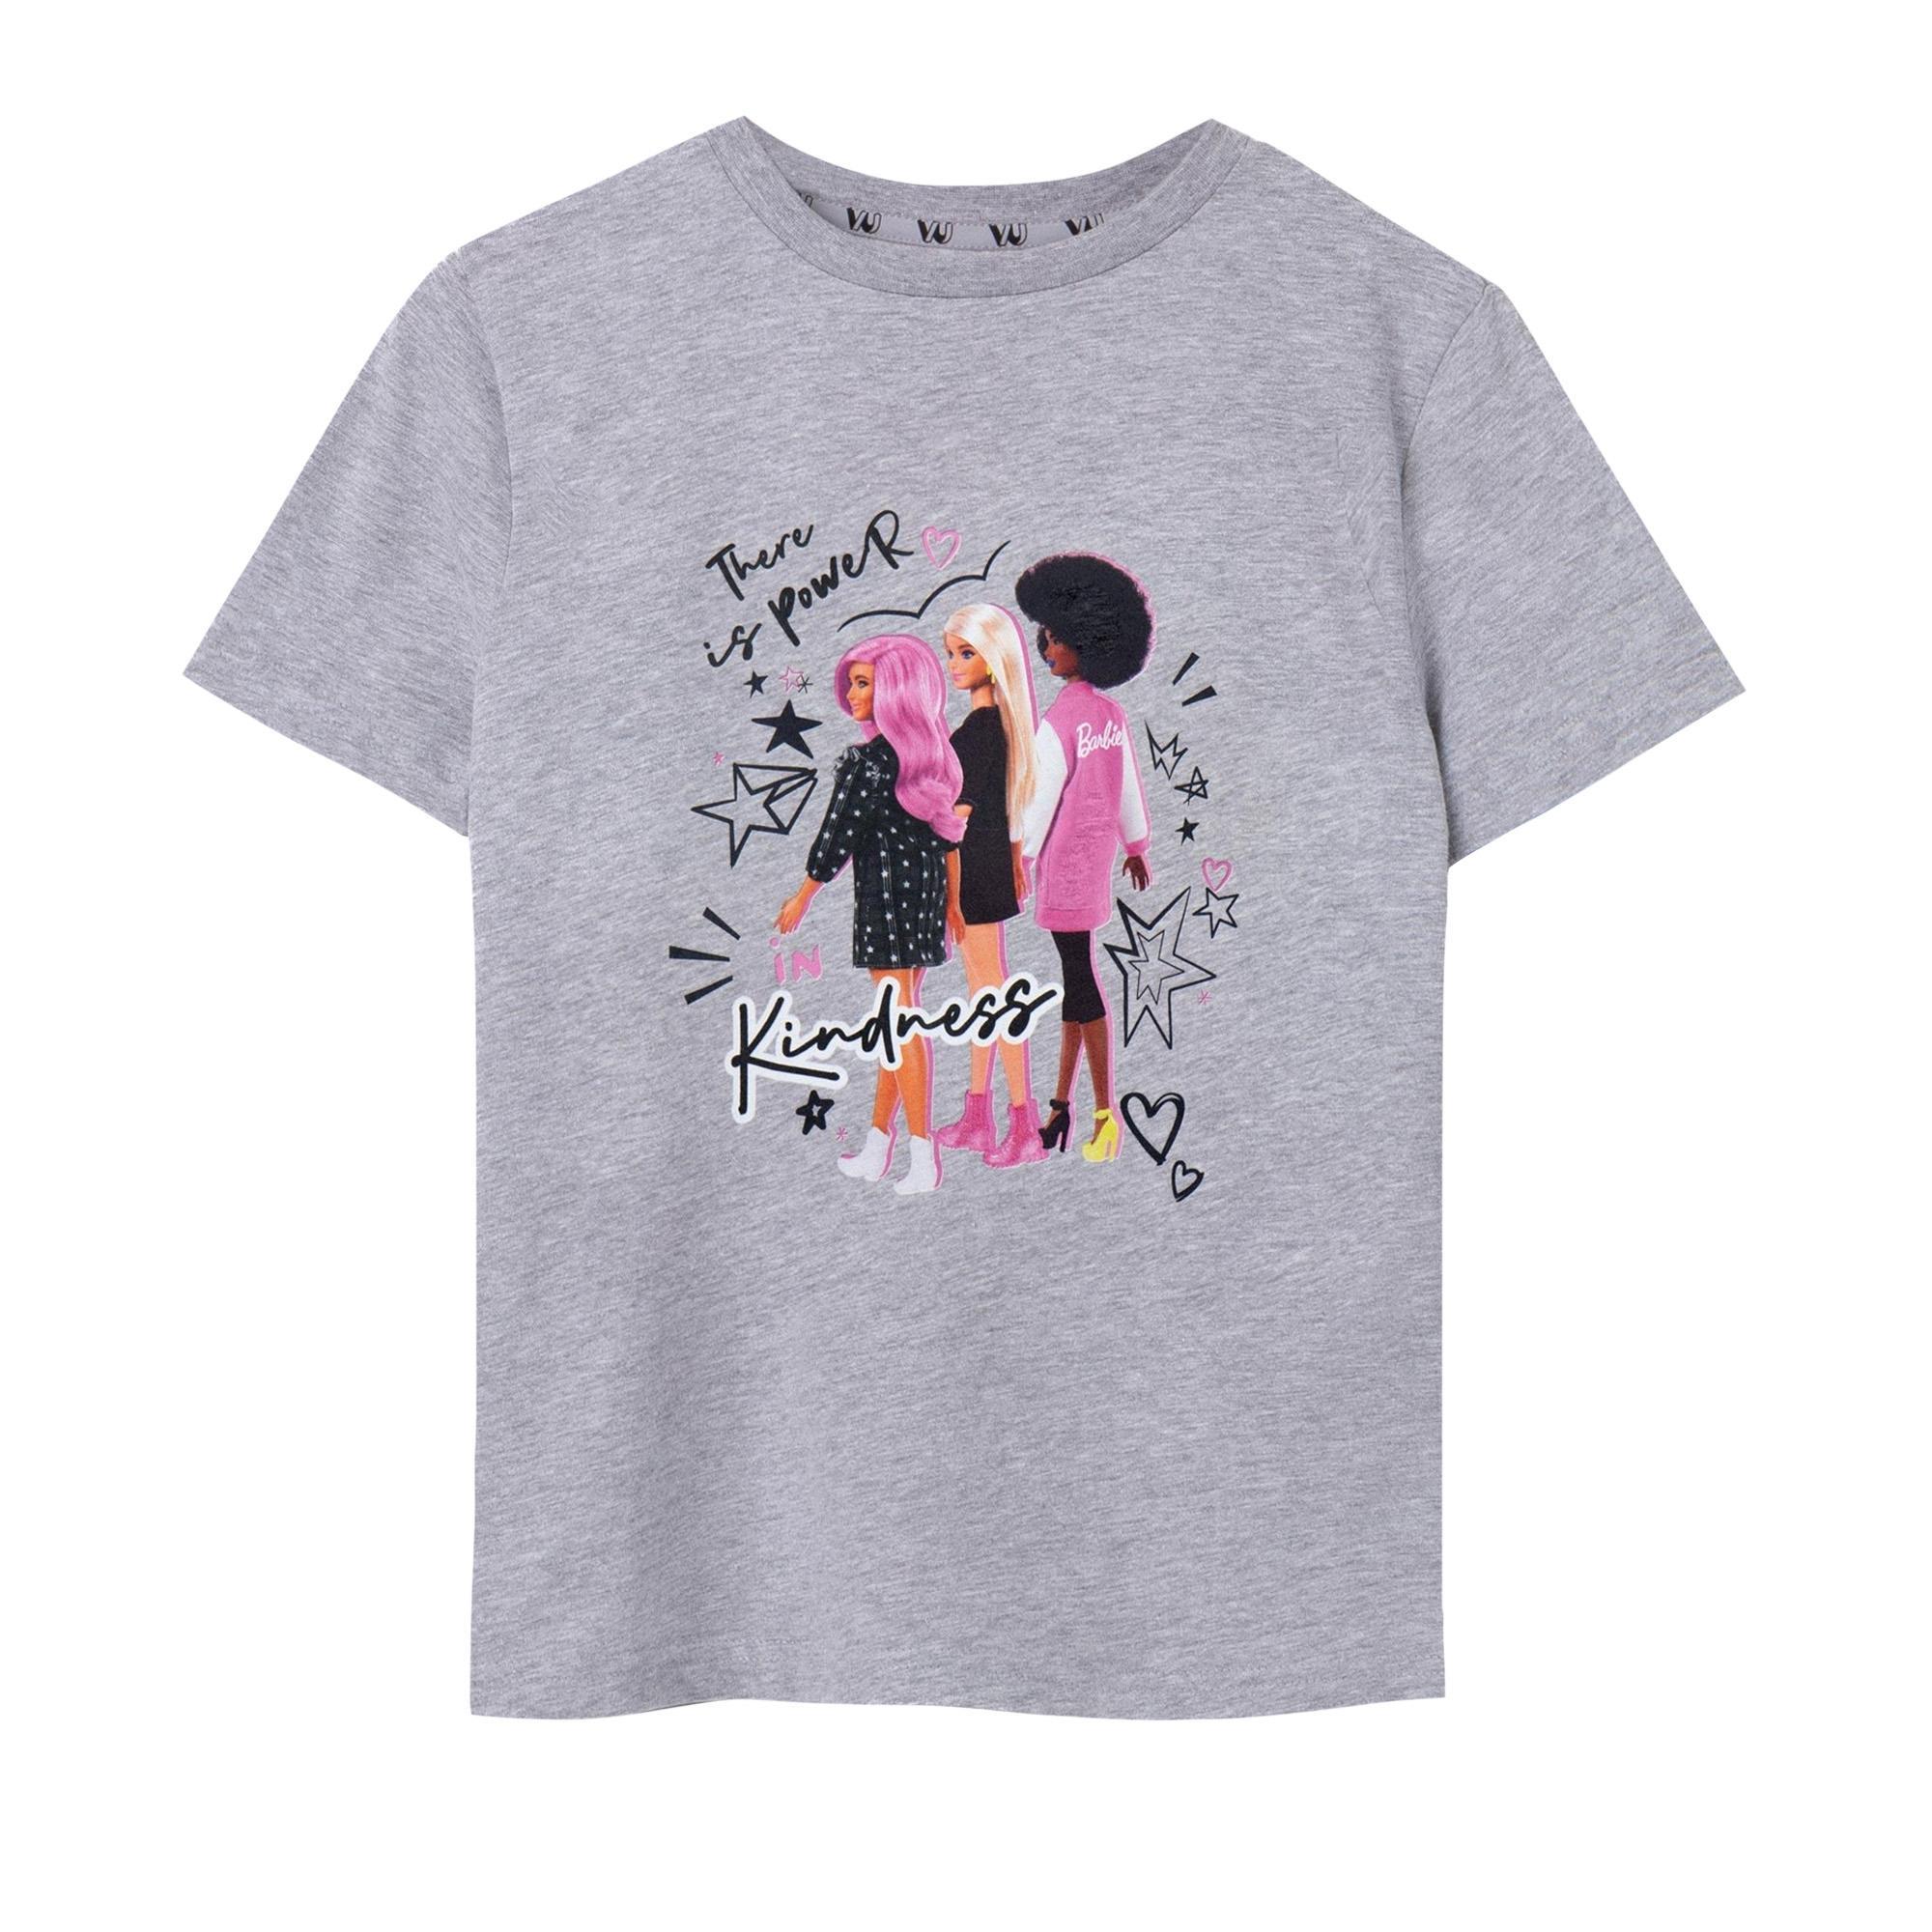 Barbie Girls There Is Power In Kindness Pose Marl Short-Sleeved T-Shirt (Grey) (9-10 Years)